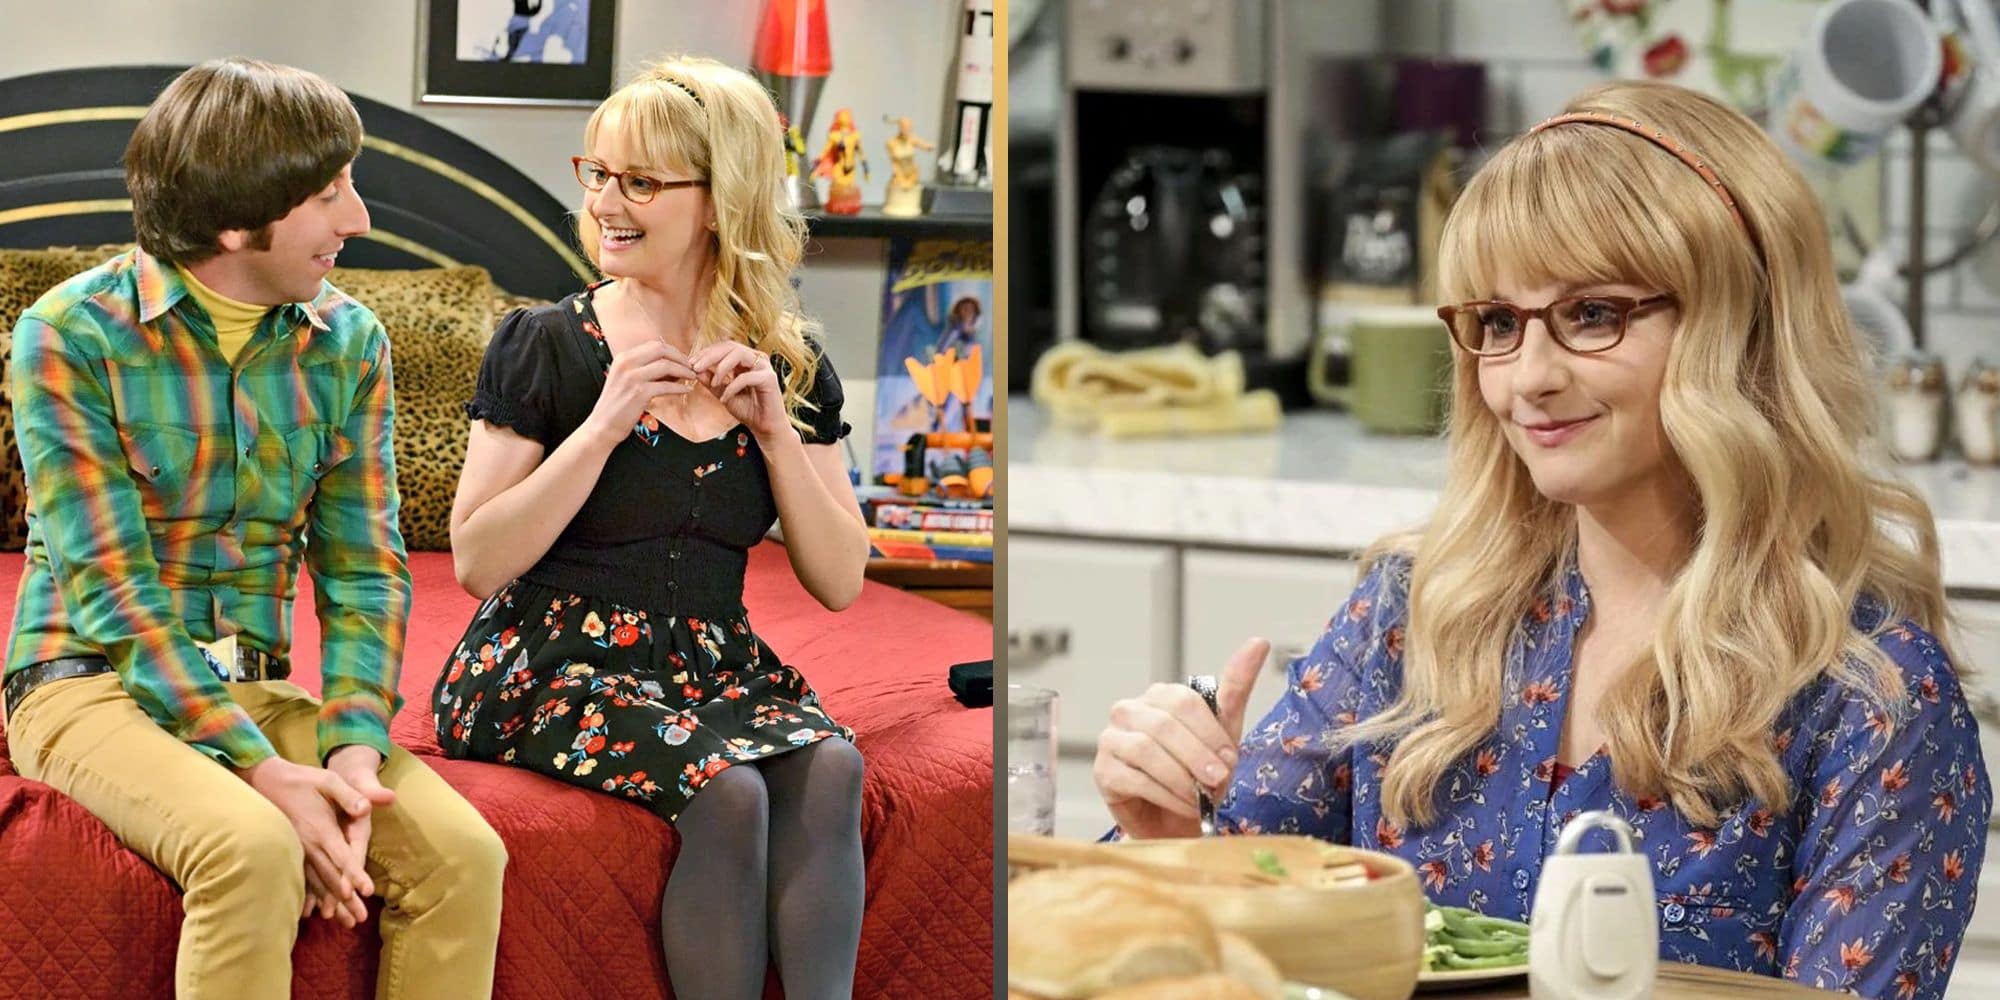 The Big Bang Theory Cast Feud Sparks as Instagram Follows Provoke Fan Speculation